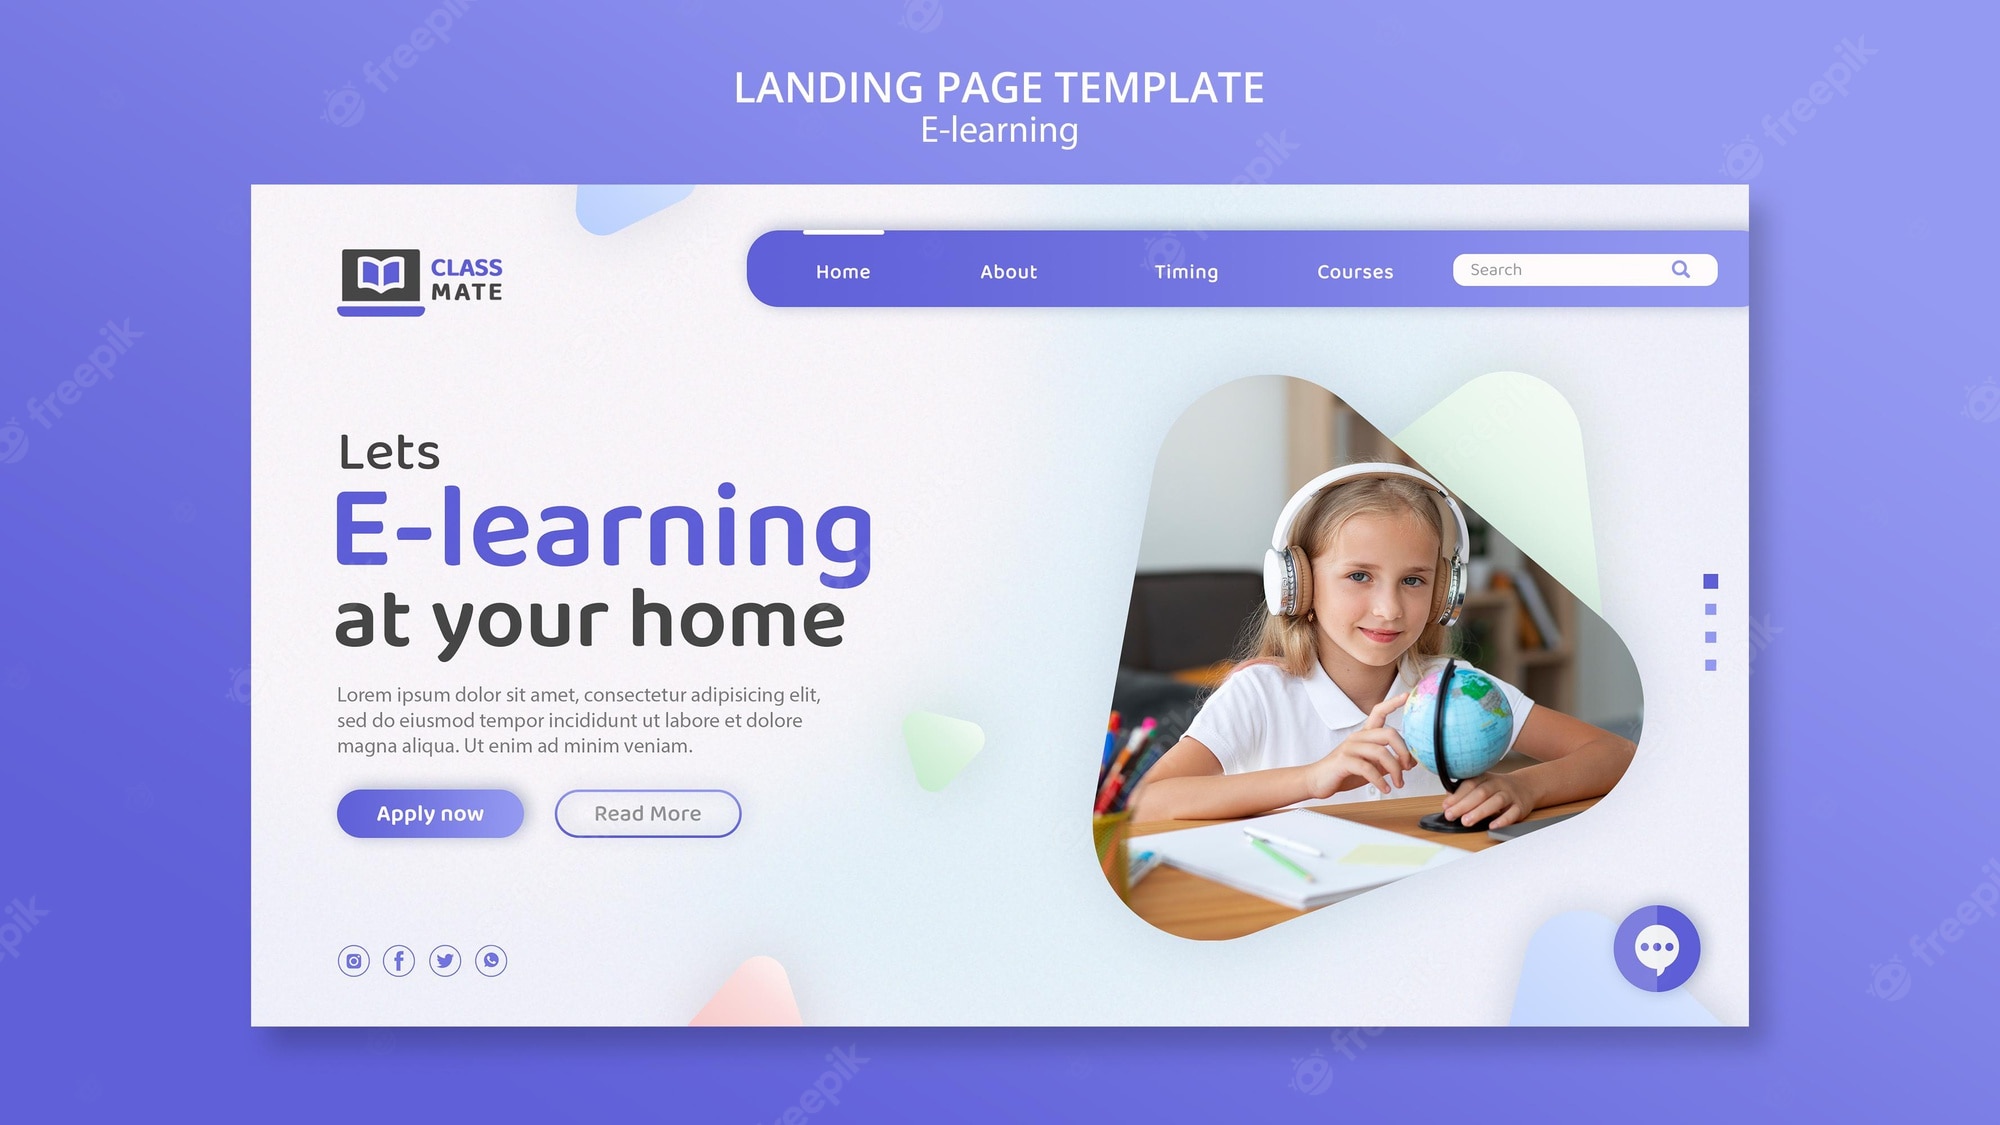 Back to school landing page Images | Free Vectors, Stock Photos & PSD